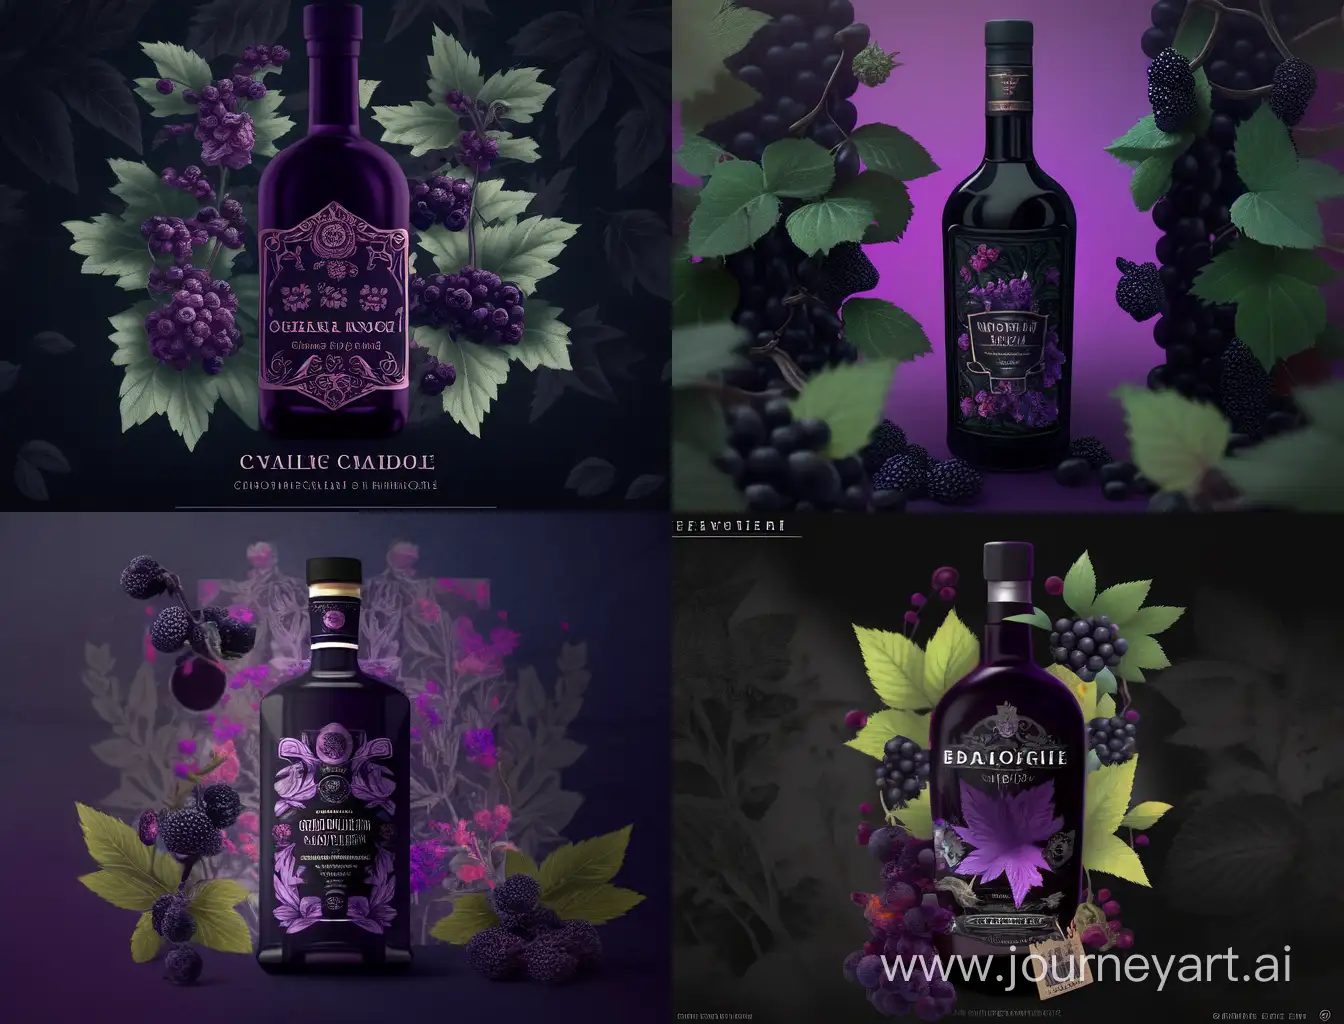 Fantasy-Gothic-Craft-Liquor-Label-with-Violette-and-Purple-Colors